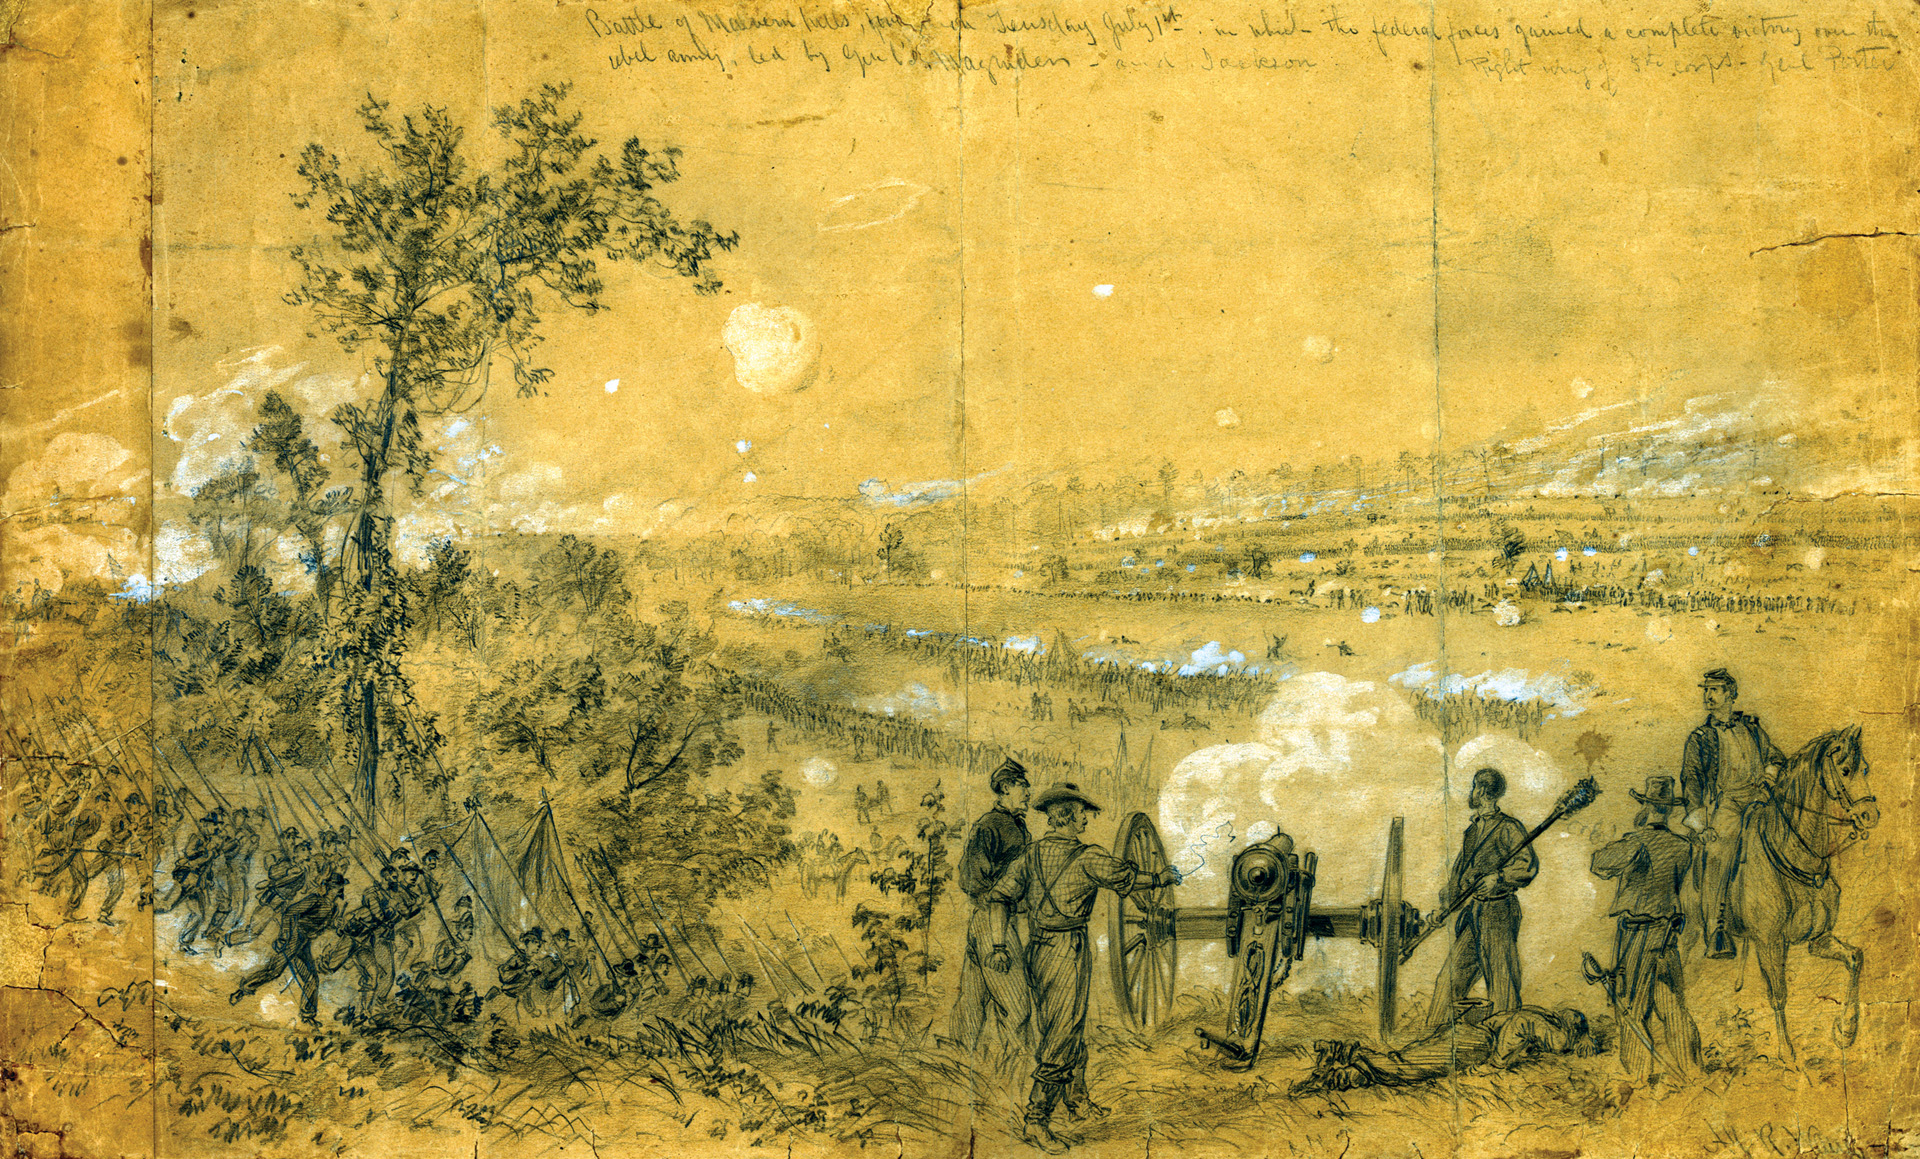 Harper’s Weekly illustrator Alfred Waud sketched the view from the Federal lines at Malvern Hill. The attack of Confederate Maj. Gen. D.H. Hill’s division forced Brig. Gen. Fitz John Porter to call for reinforcements.